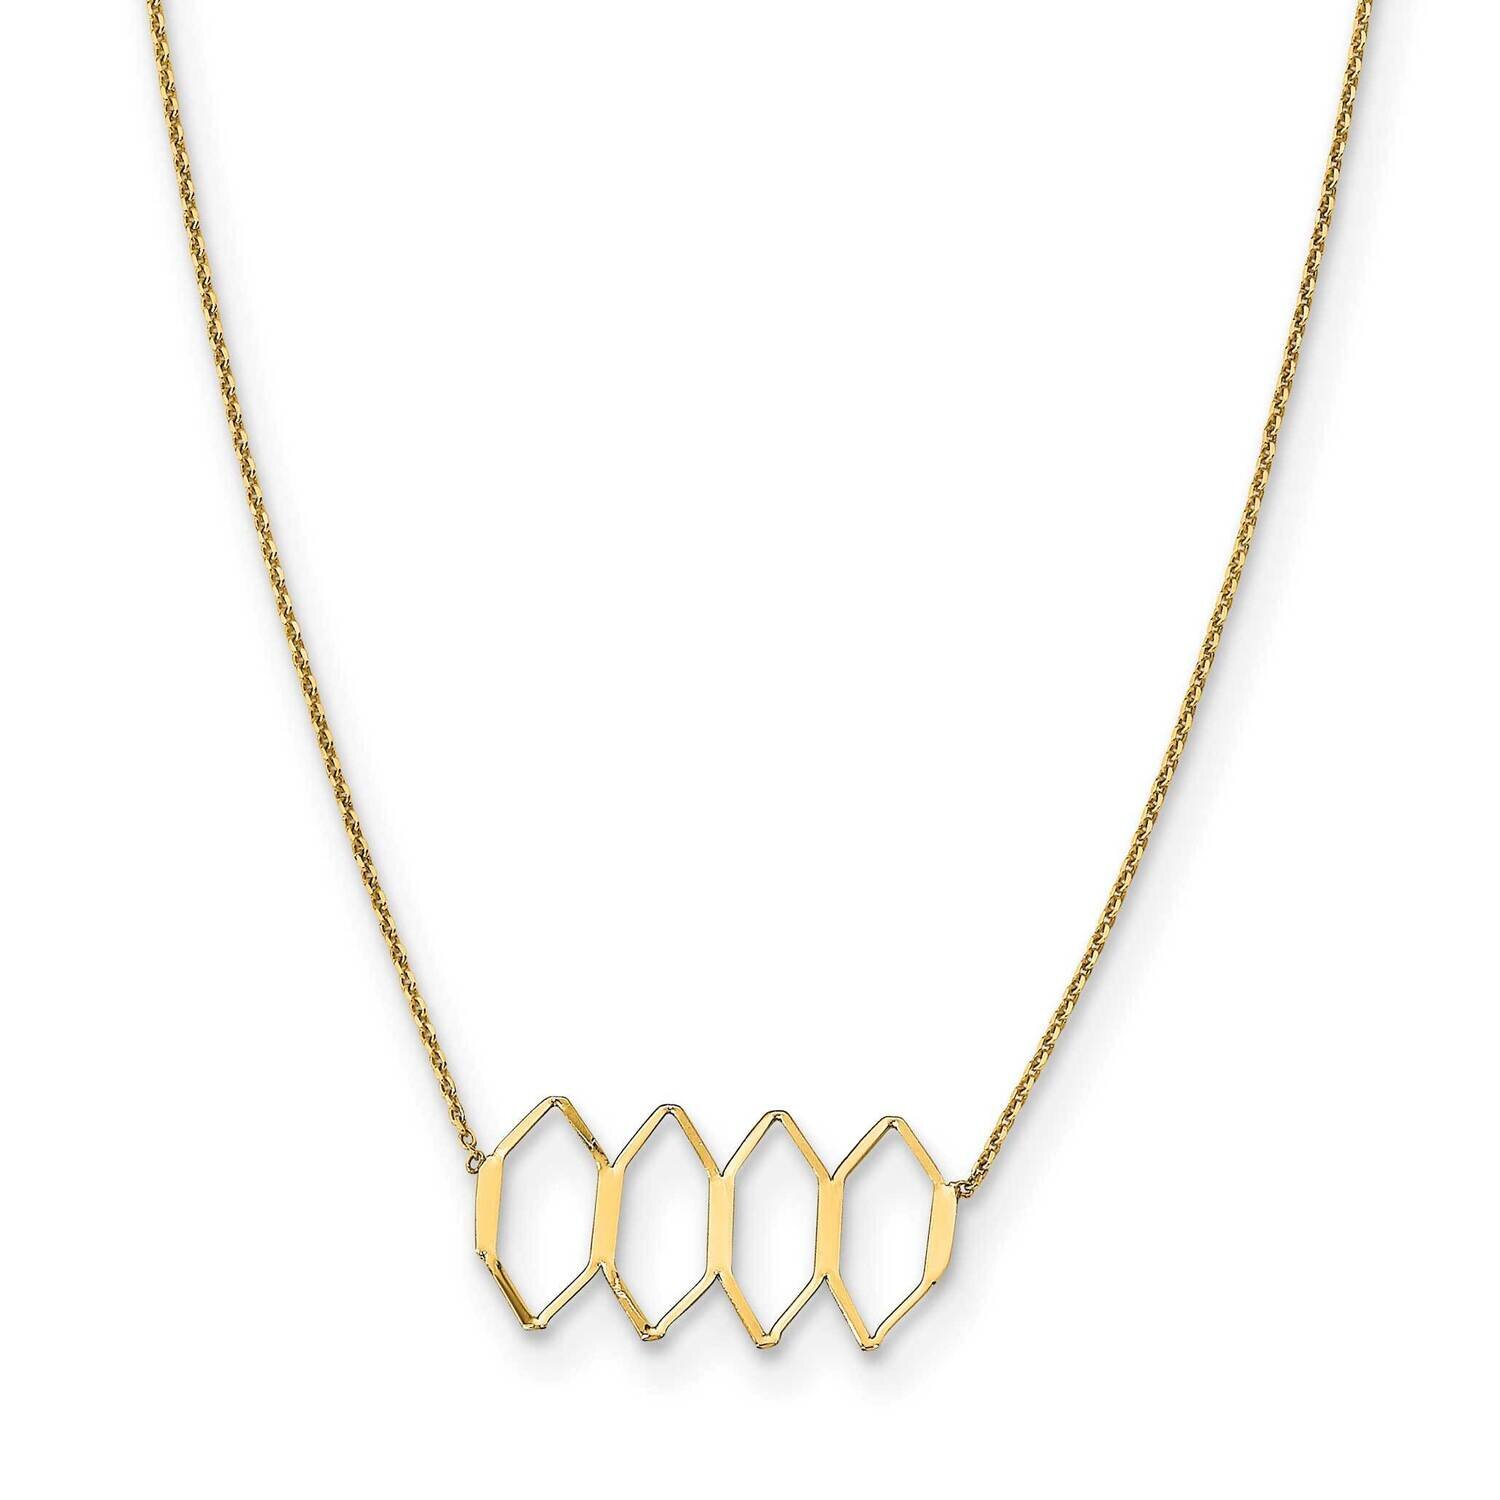 Fancy Shapes with 2 In Extender Necklace 18 Inch 14k Gold Polished SF2865-16